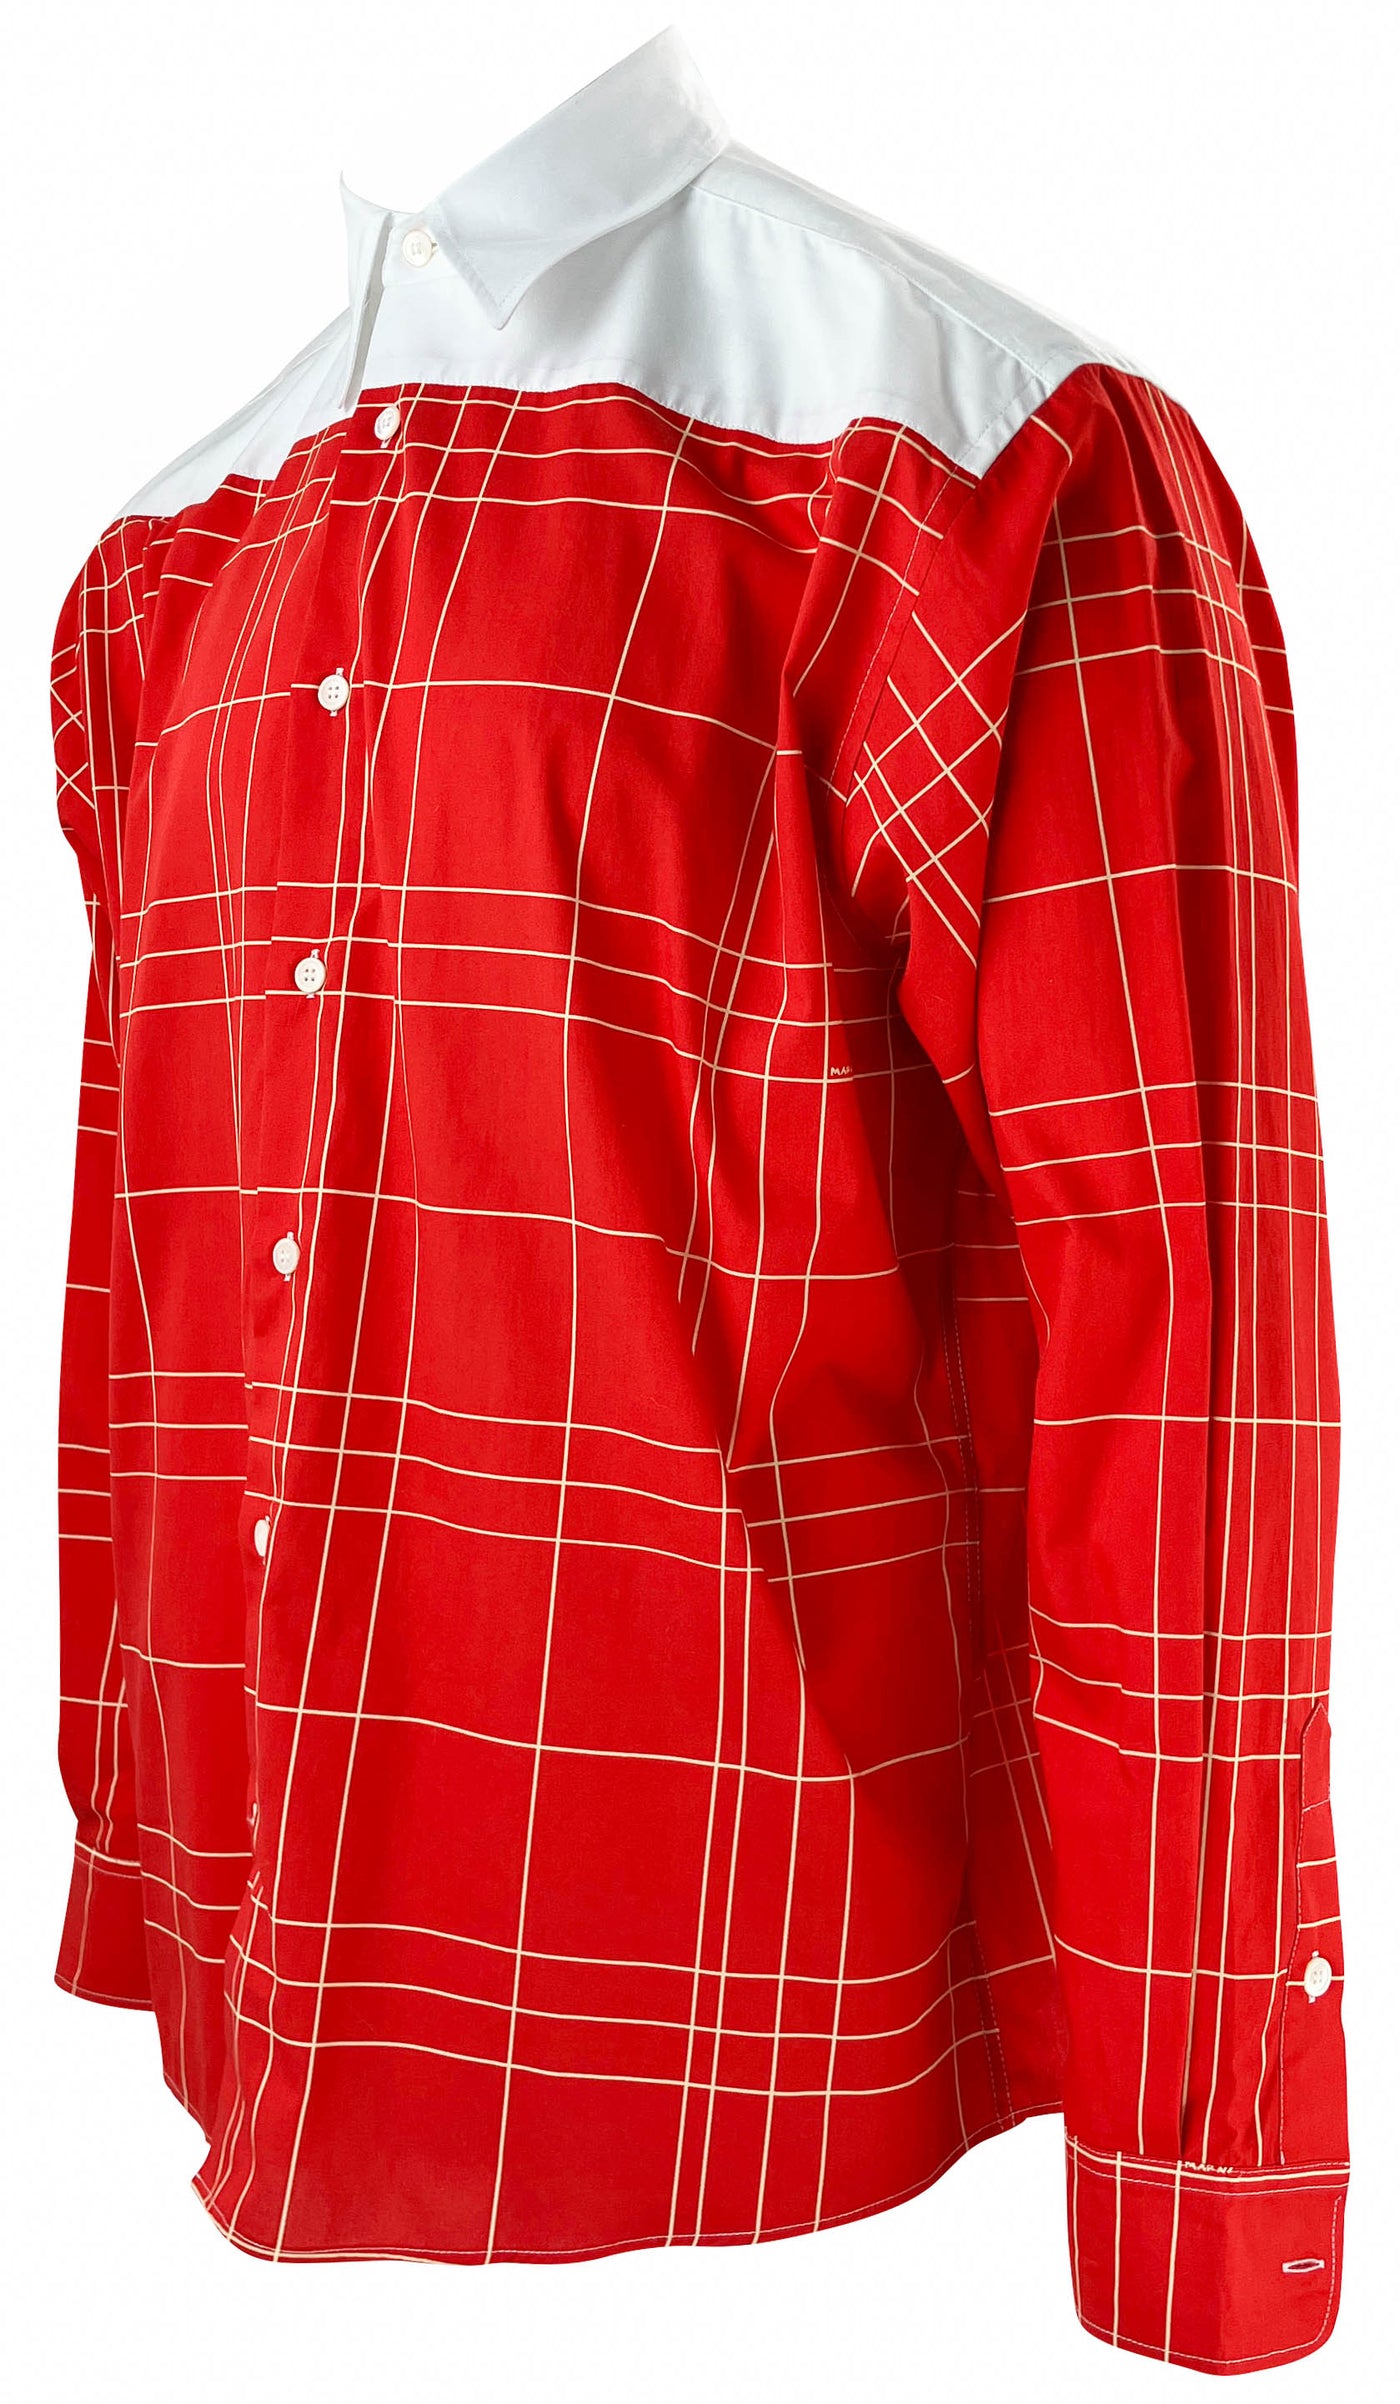 Marni Check Poplin Button Down in Red and White - Discounts on Marni at UAL